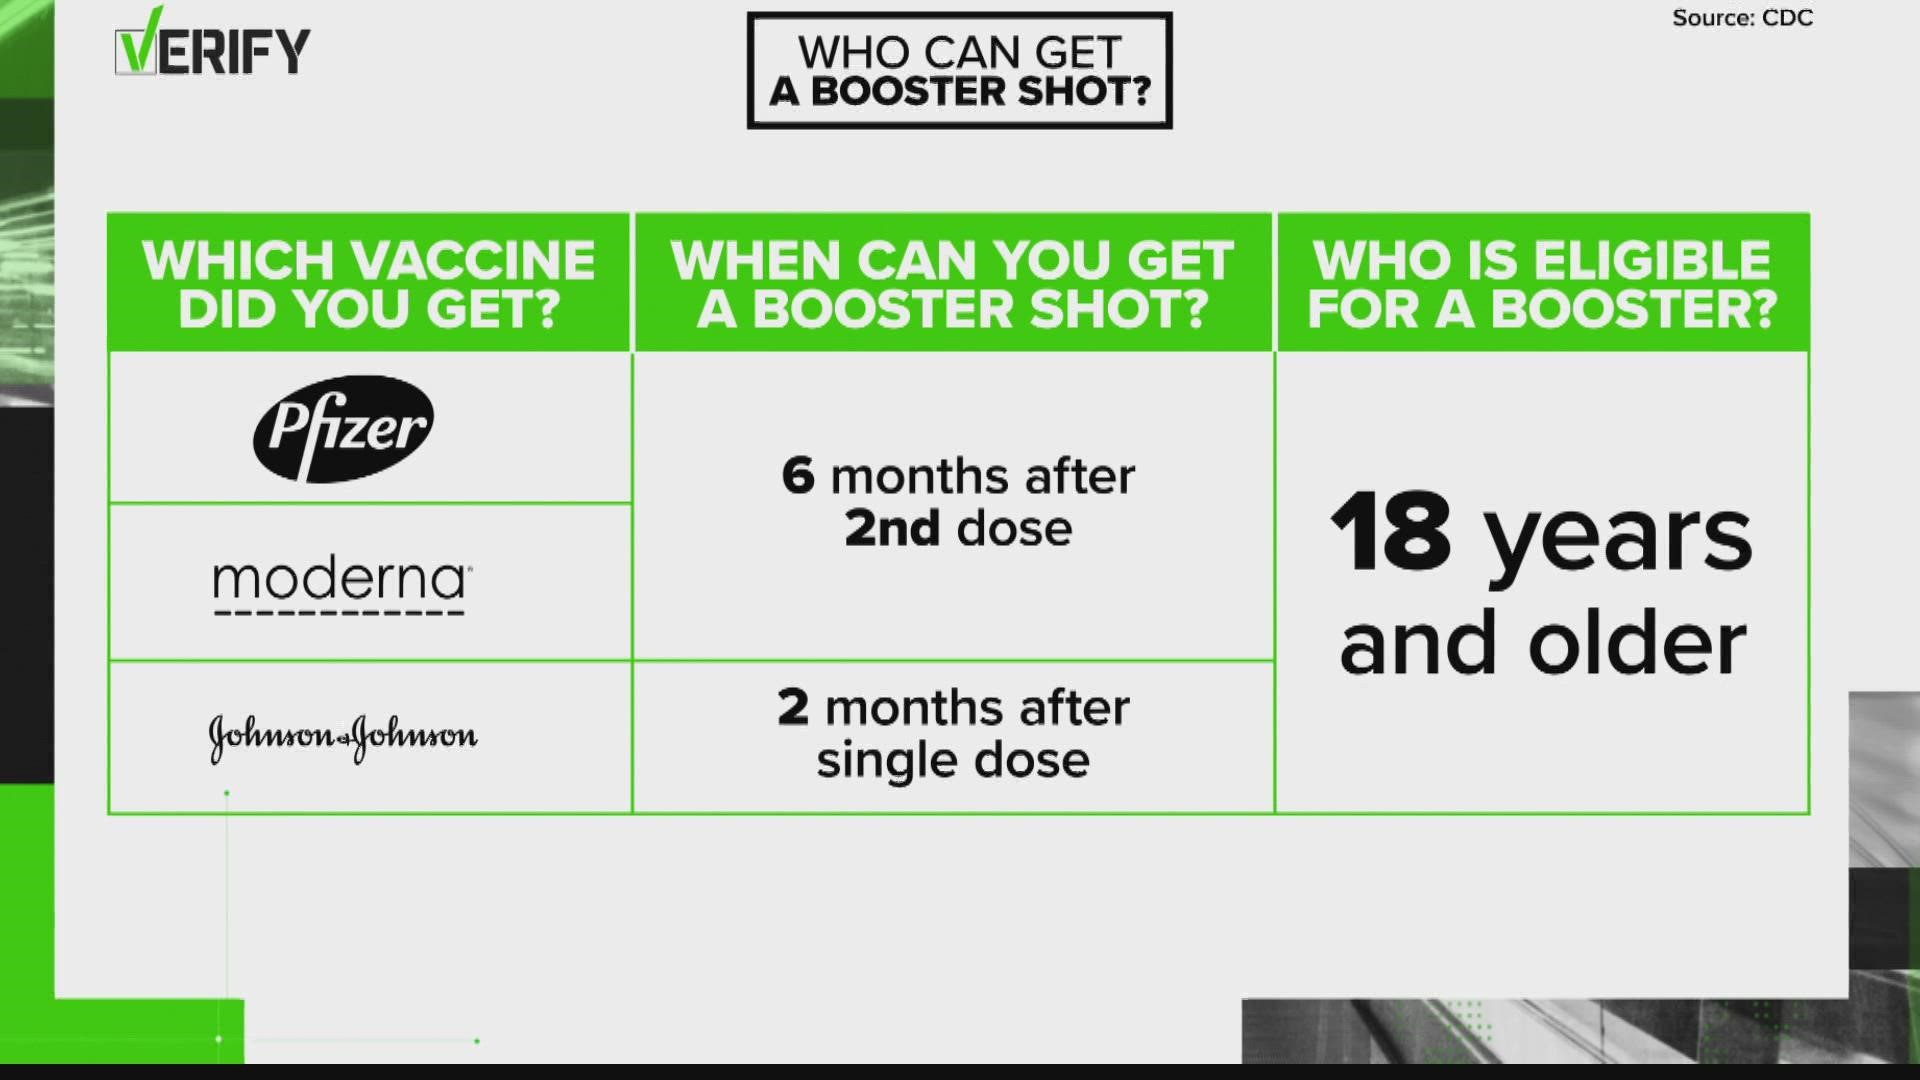 Official say you can mix and match vaccines.